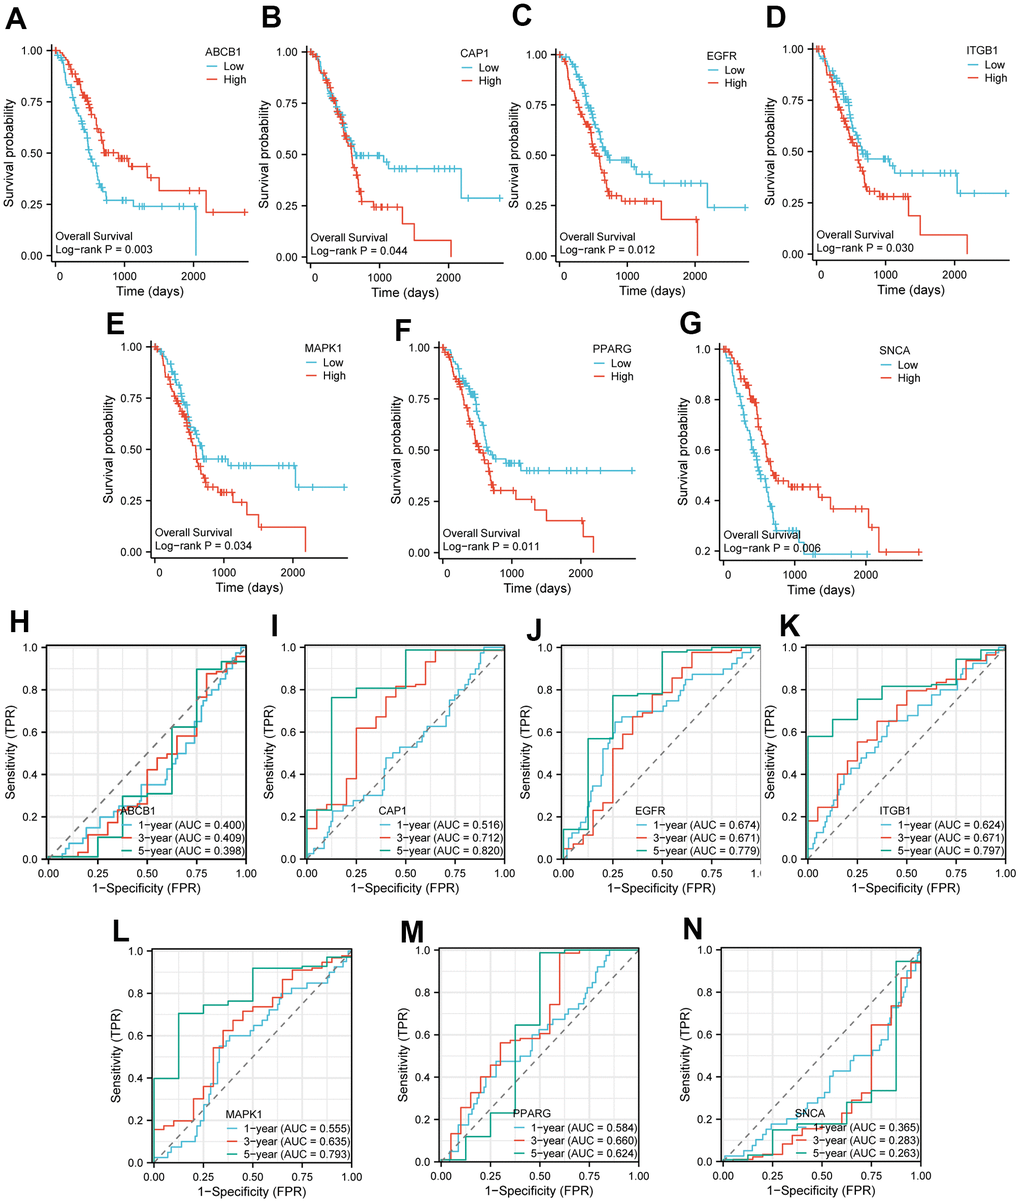 KM curve and time ROC of key genes in TCGA-PAAD. (A–G) The KM curve of the high and low expression groups of Key genes in TCGA-PAAD. Patients with high expression of ABCB1 (A) and SNCA (G) had significantly longer overall survival; patients with high expression of CAP1 (B), EGFR (C), ITGB1 (D), MAPK1 (E) and PPARG (F) had significantly shorter overall survival. (H–N) The time ROC curve of the high and low expression groups of Key genes in TCGA-PAAD. ROC curve showed the efficiency of 7 key gene expression levels to predict the prognosis over time. The X-axis represents a false positive rate, and the Y-axis represents a true positive rate. OS, Overall survival; KM, Kaplan–Meier; ROC, receiver operating characteristic curve.